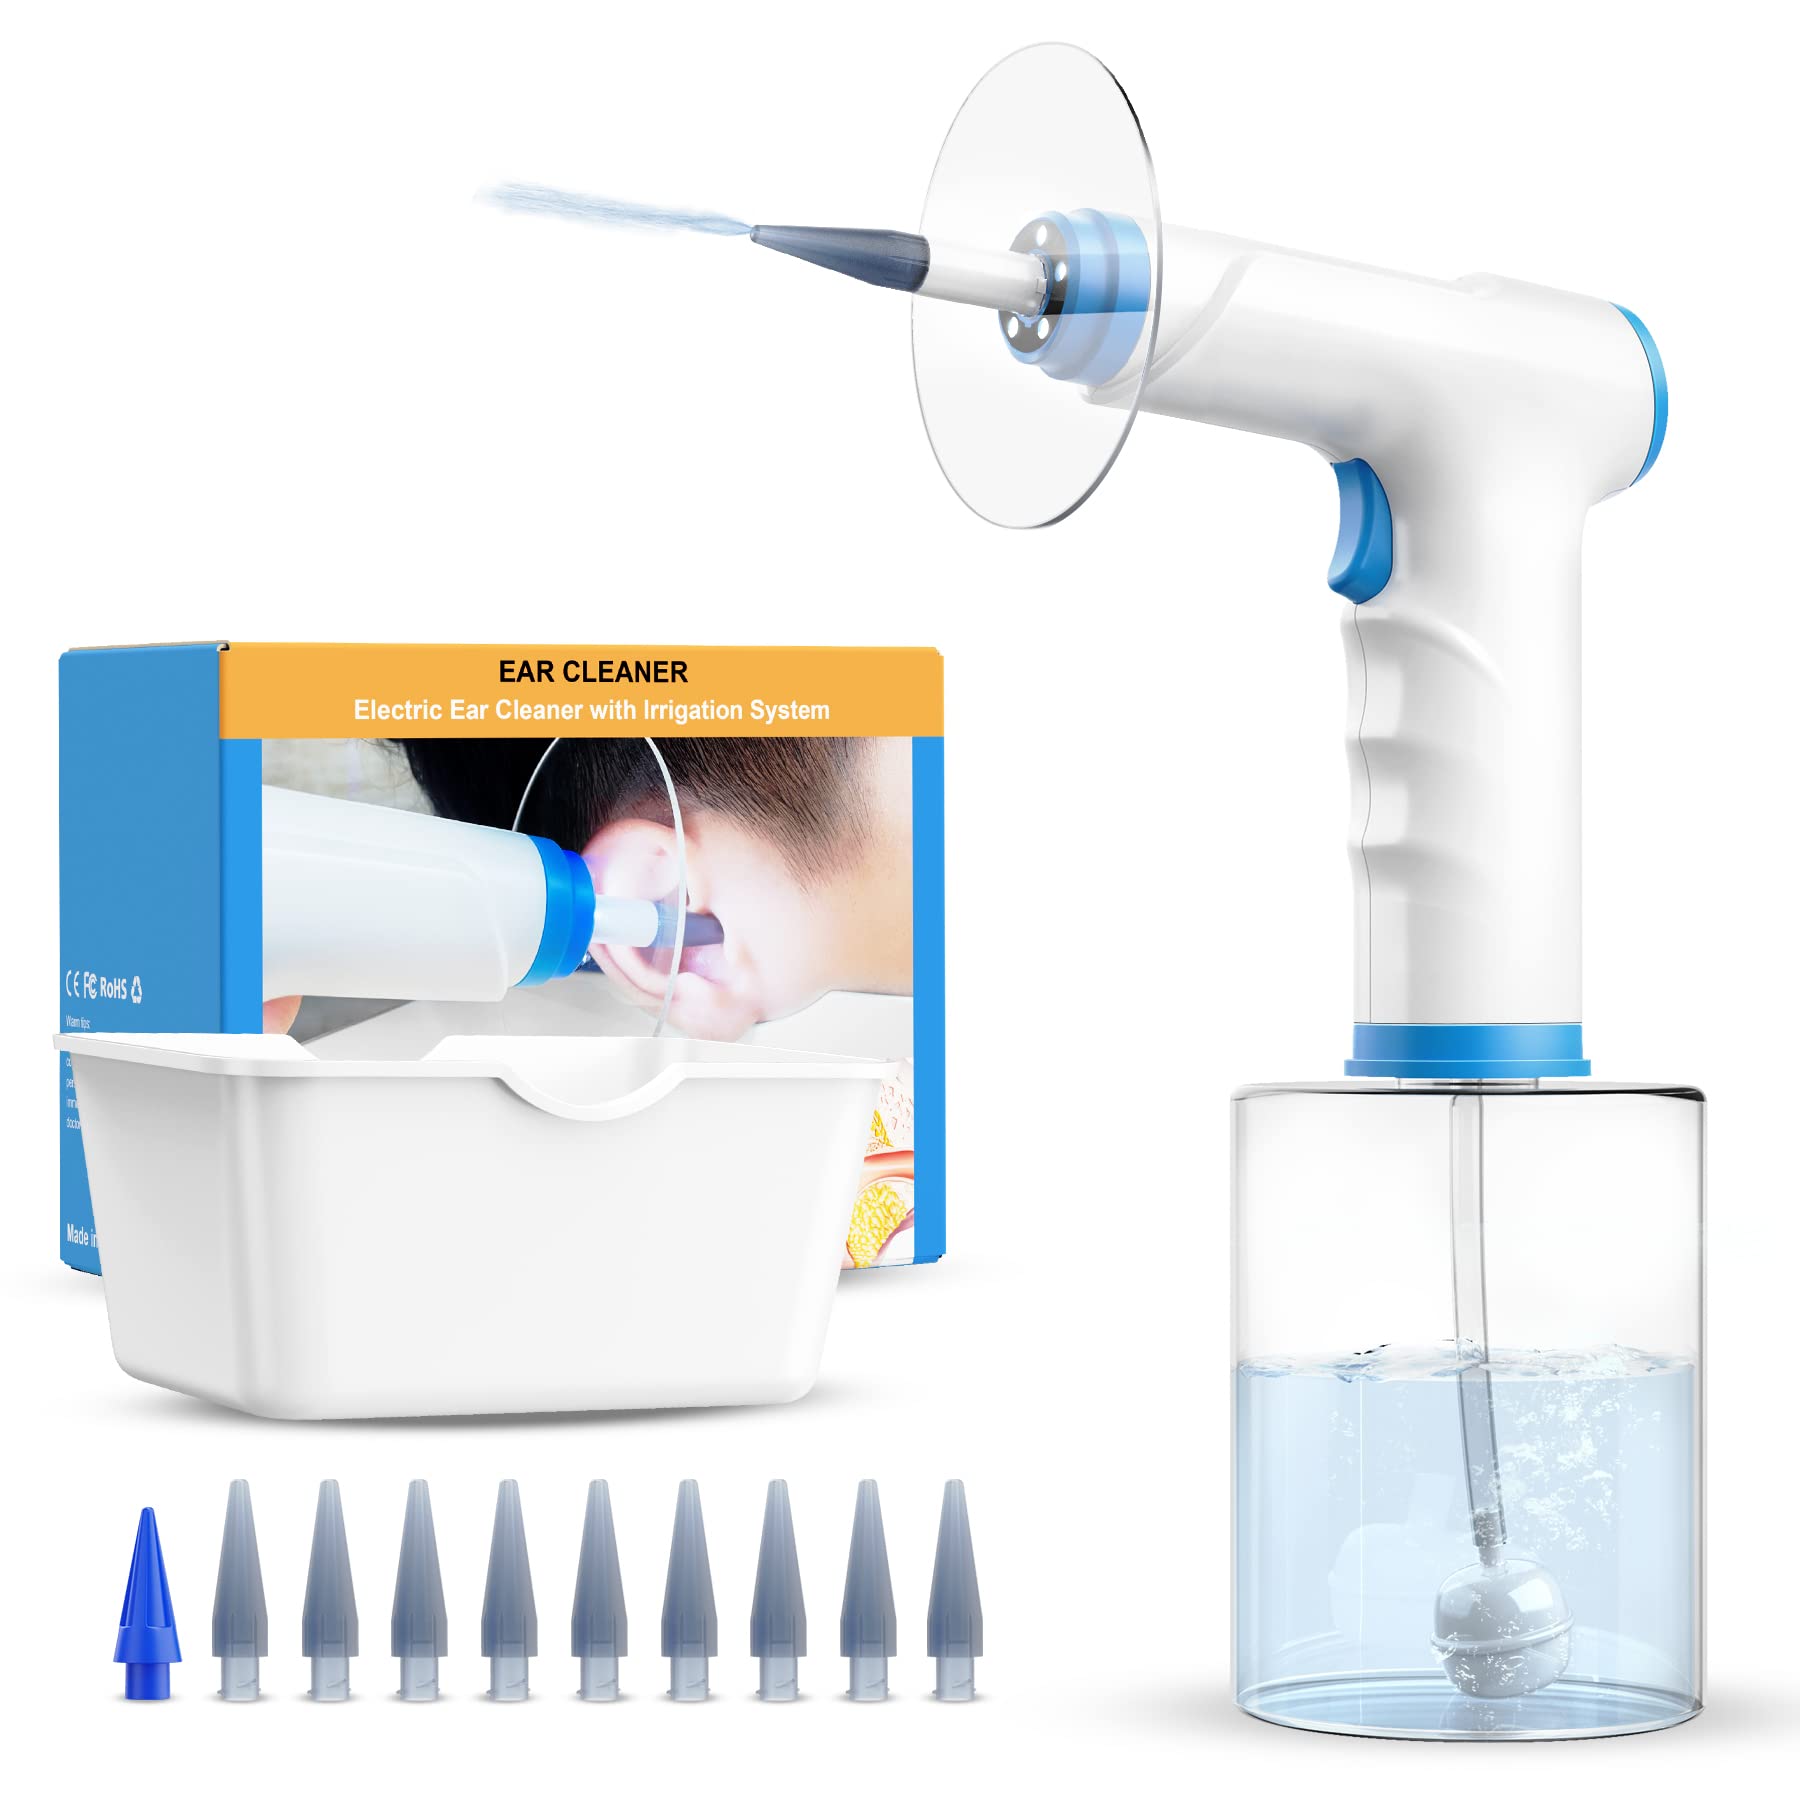 YUYUKO Ear Wax Removal, Ear Irrigation Cleaner Kit, Electric Ear Flush Tool with 4 Cleaning Modes, One-touch Start Water Spray, 10 Tips and Ear Wash Basin